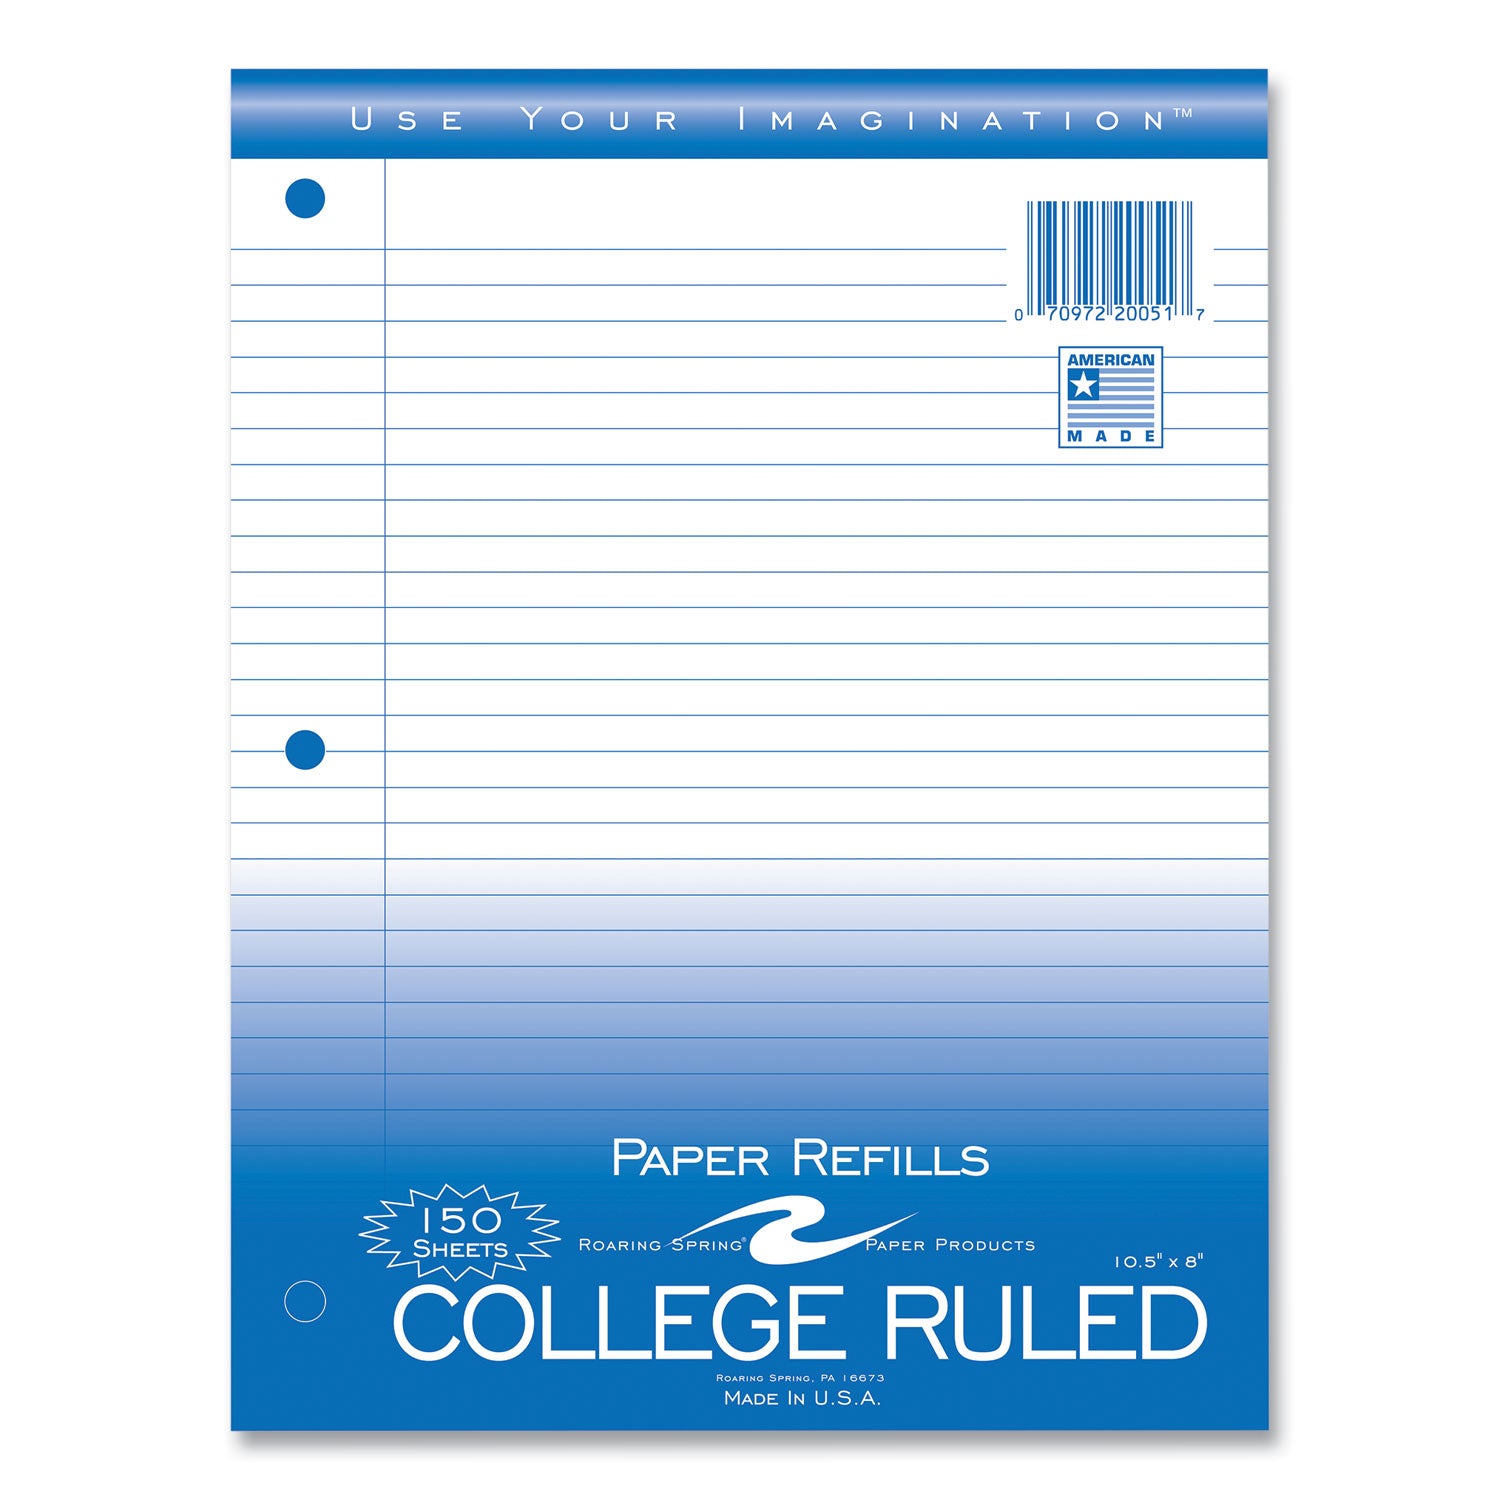 loose-leaf-paper-8-x-105-3-hole-punched-college-rule-white-150-sheets-pack-24-packs-carton-ships-in-4-6-business-days_roa20051cs - 4